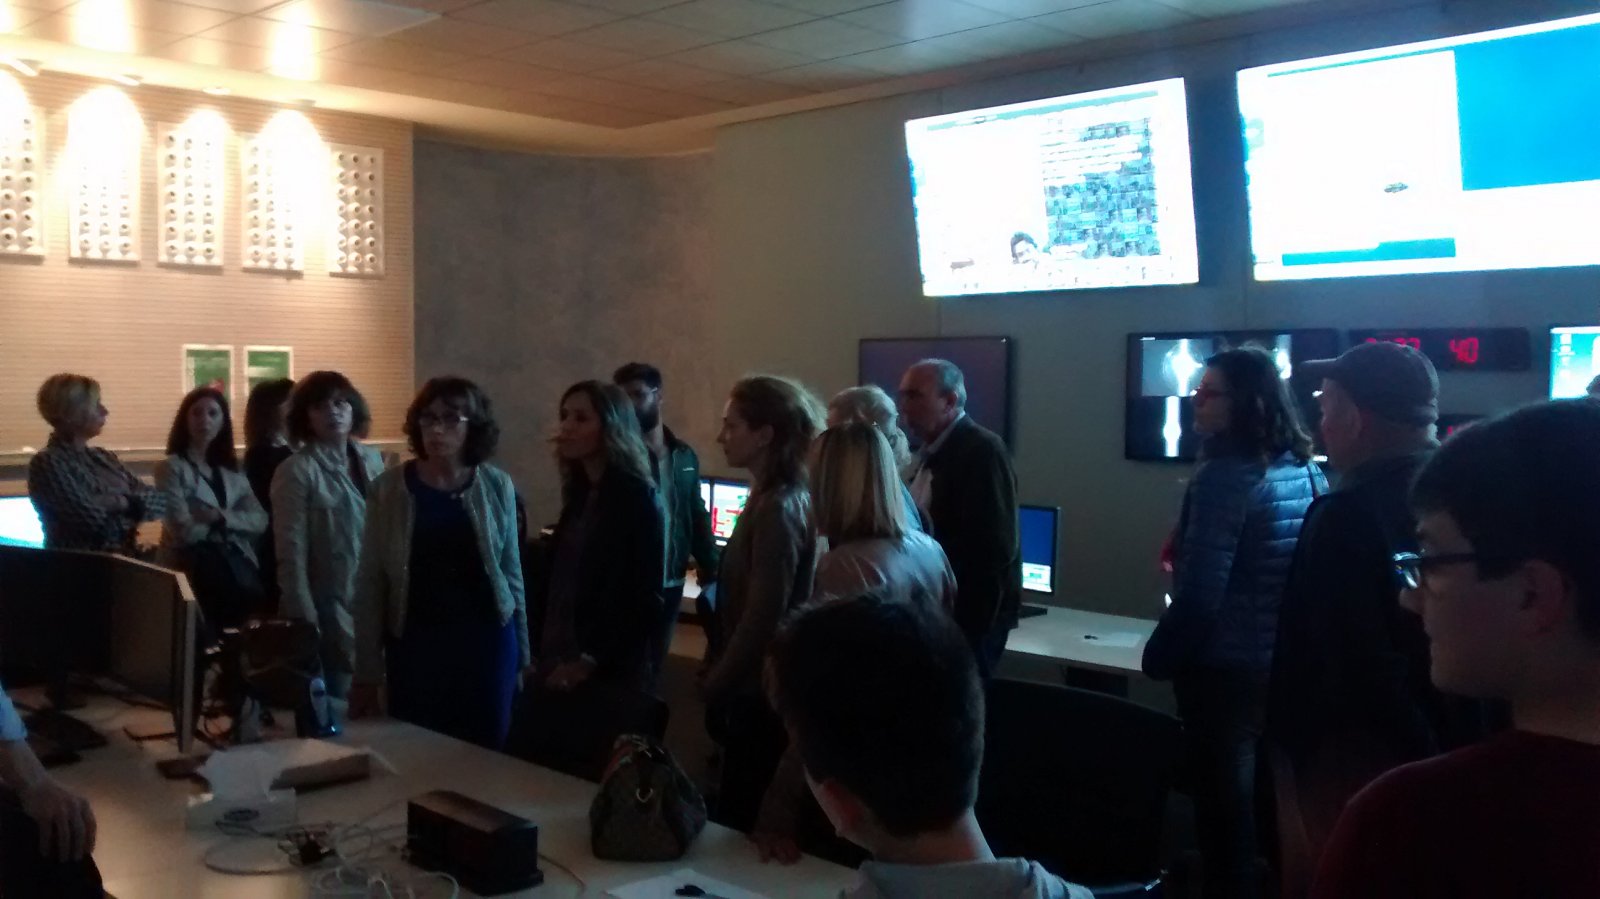 Visiting the Virgo control room during the GOLD event at EGO (May 2015)